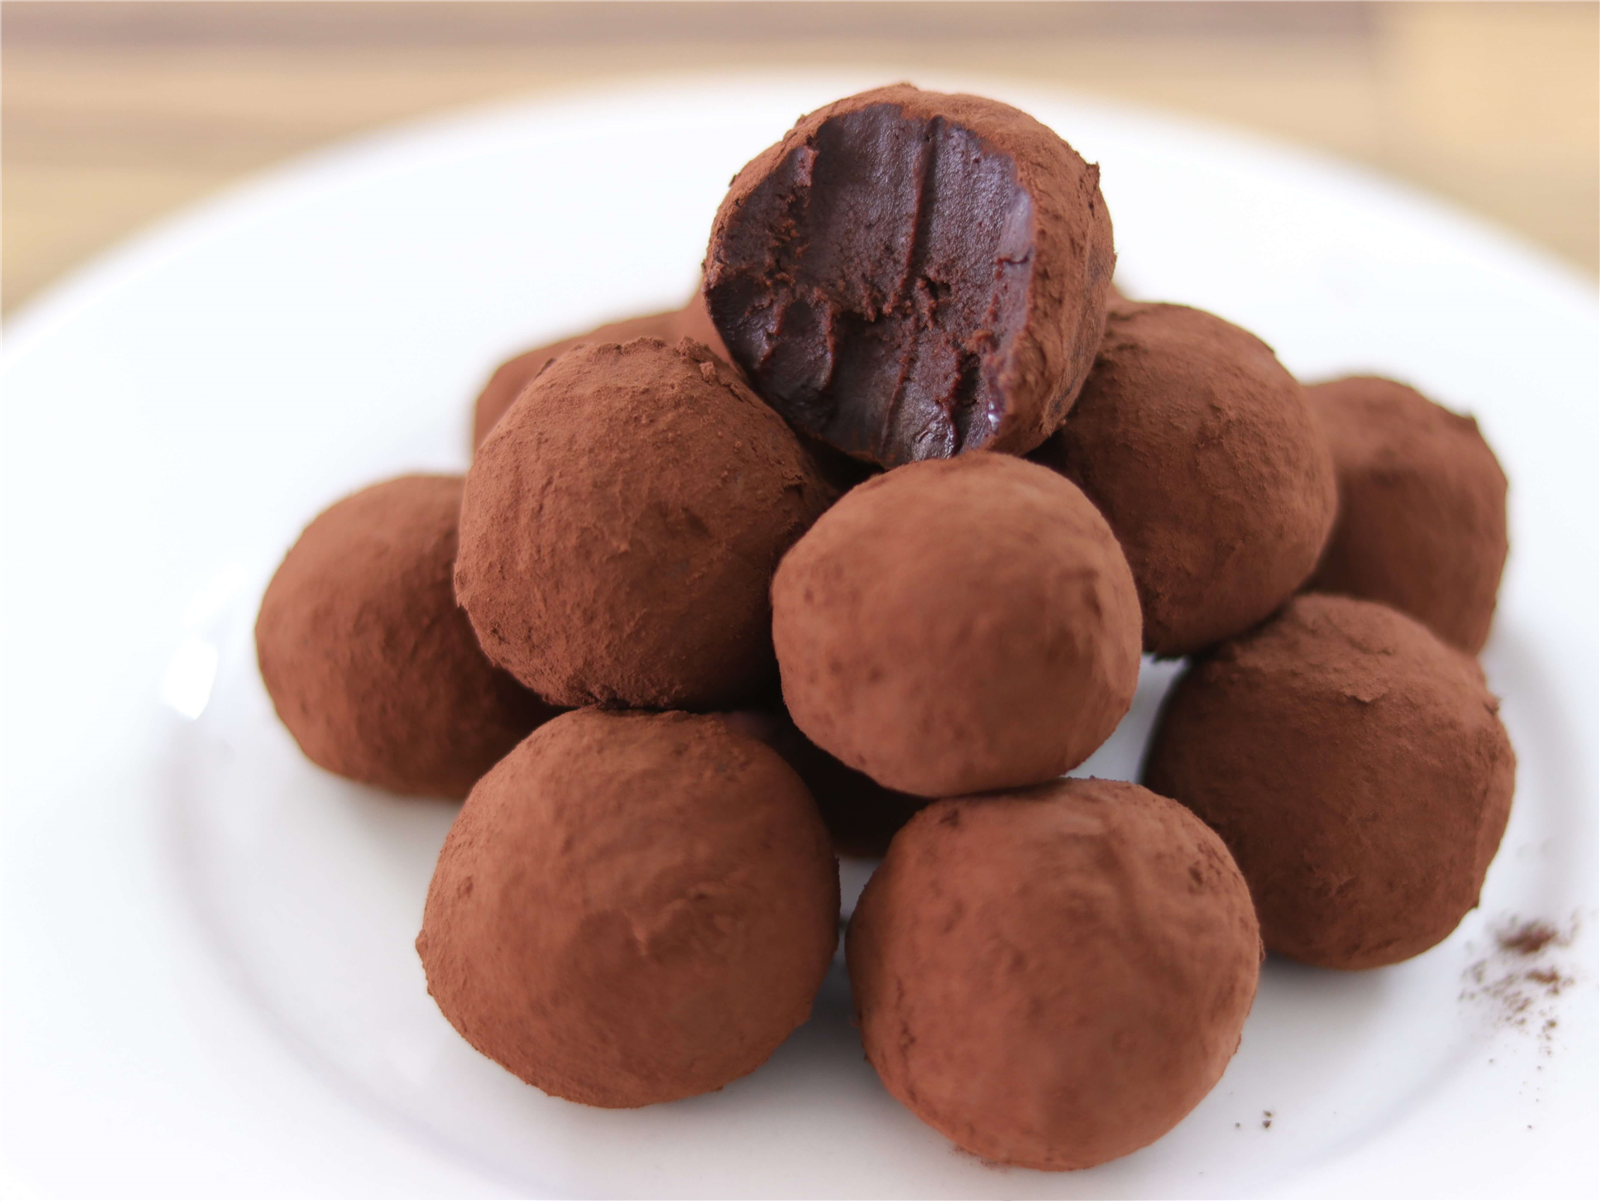 Classic Chocolate Truffles Recipe - The Cooking Foodie